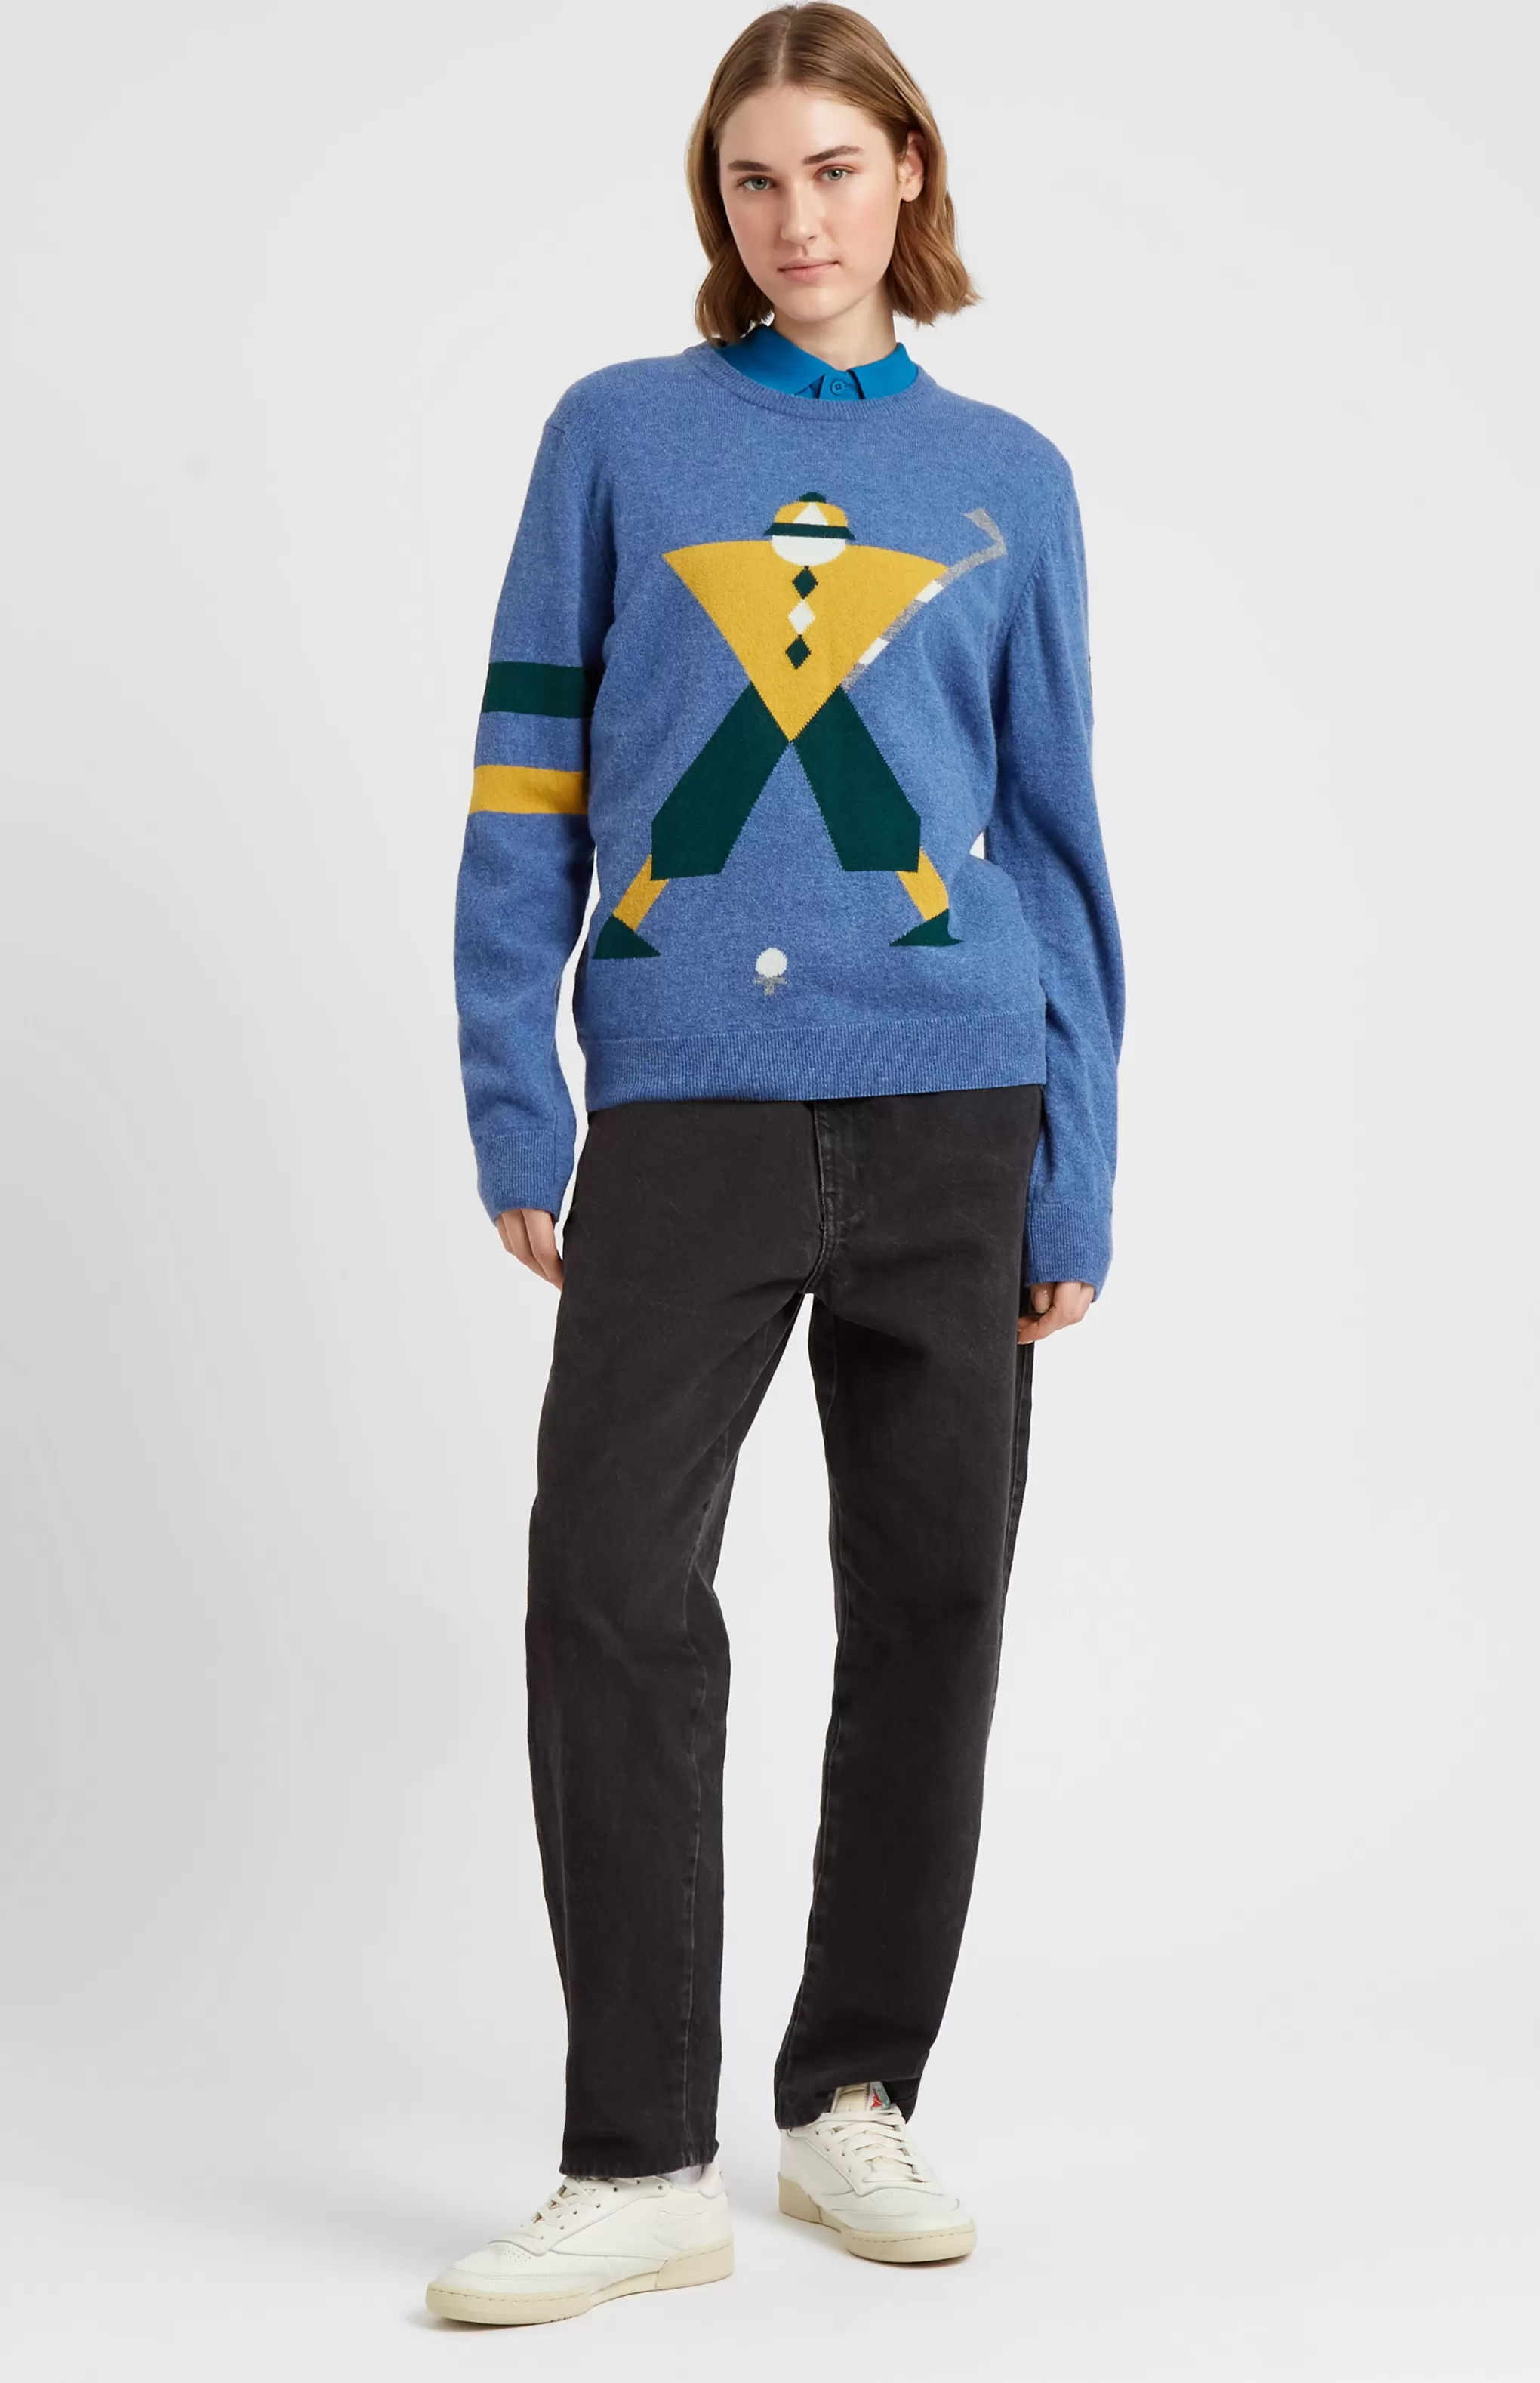 Clearance Unisex Round Neck Geometric George Golf Jumper In Denim. Men Pringle Heritage Unisex Collections